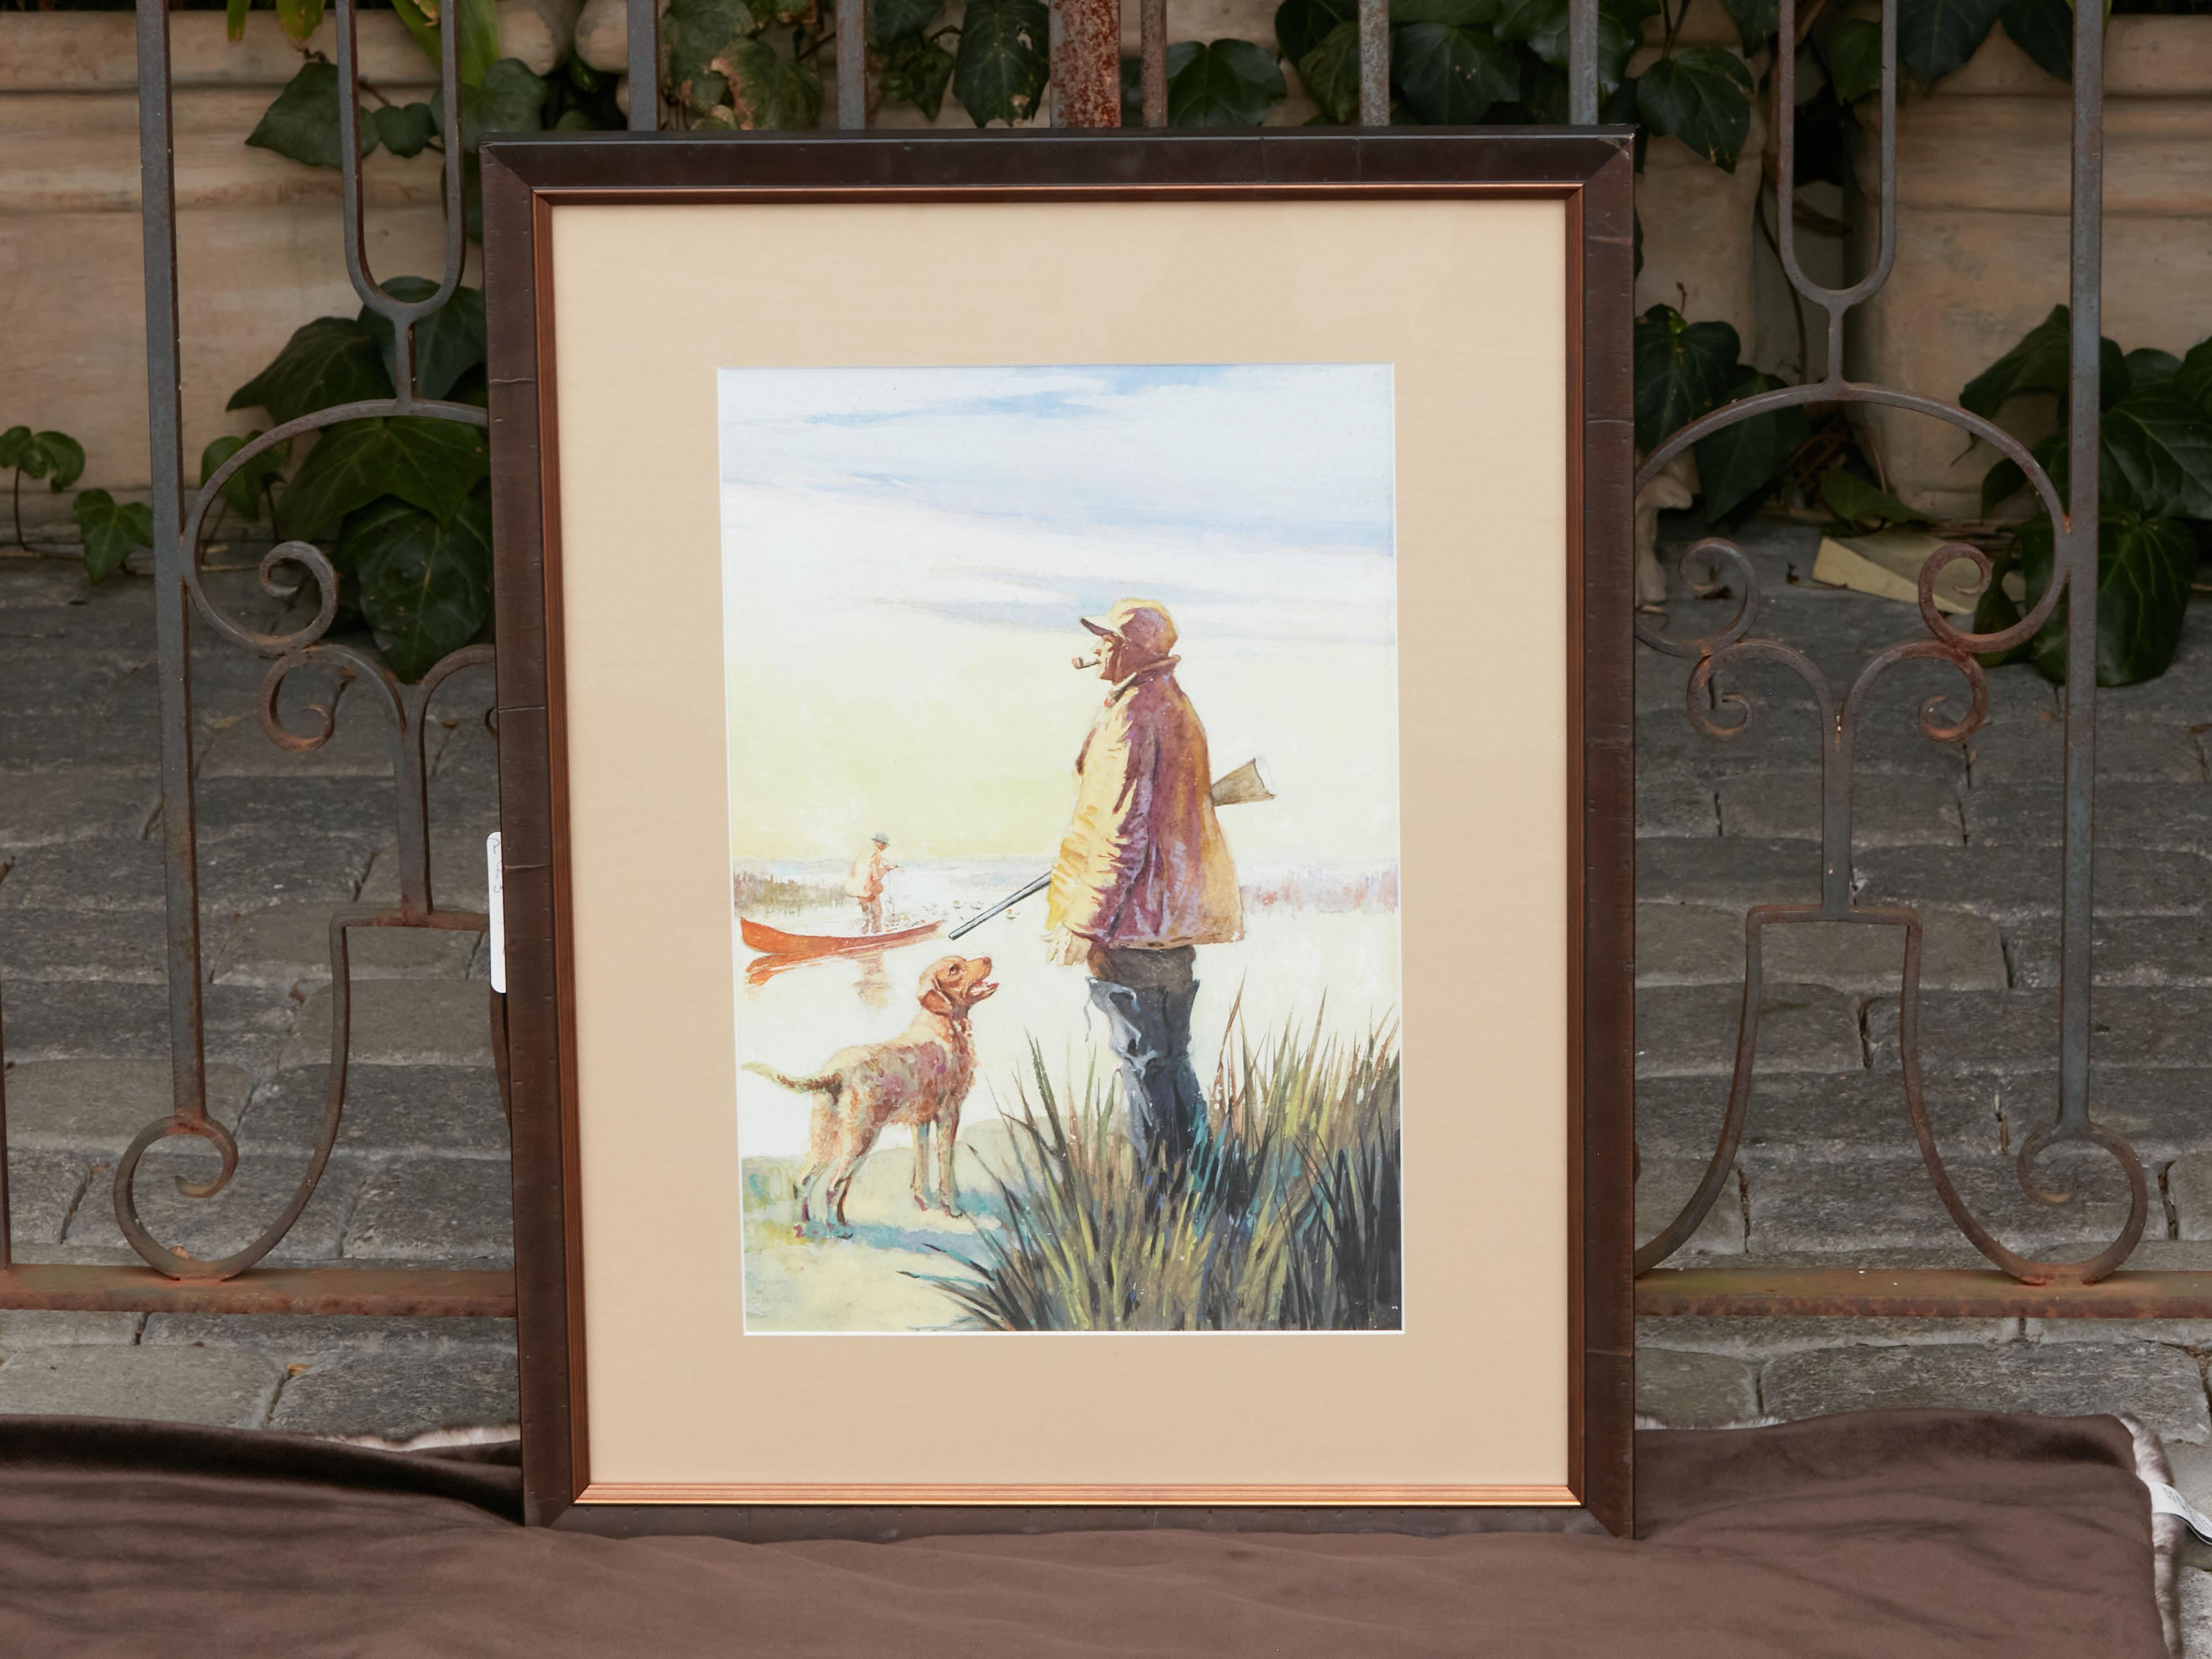 An American framed watercolor from the mid 20th century depicting a hunting scene. Made in the USA during the Midcentury period, this watercolor features a scene depicted at sunrise. A pipe-smoking hunter, holding a rifle in his right arm and